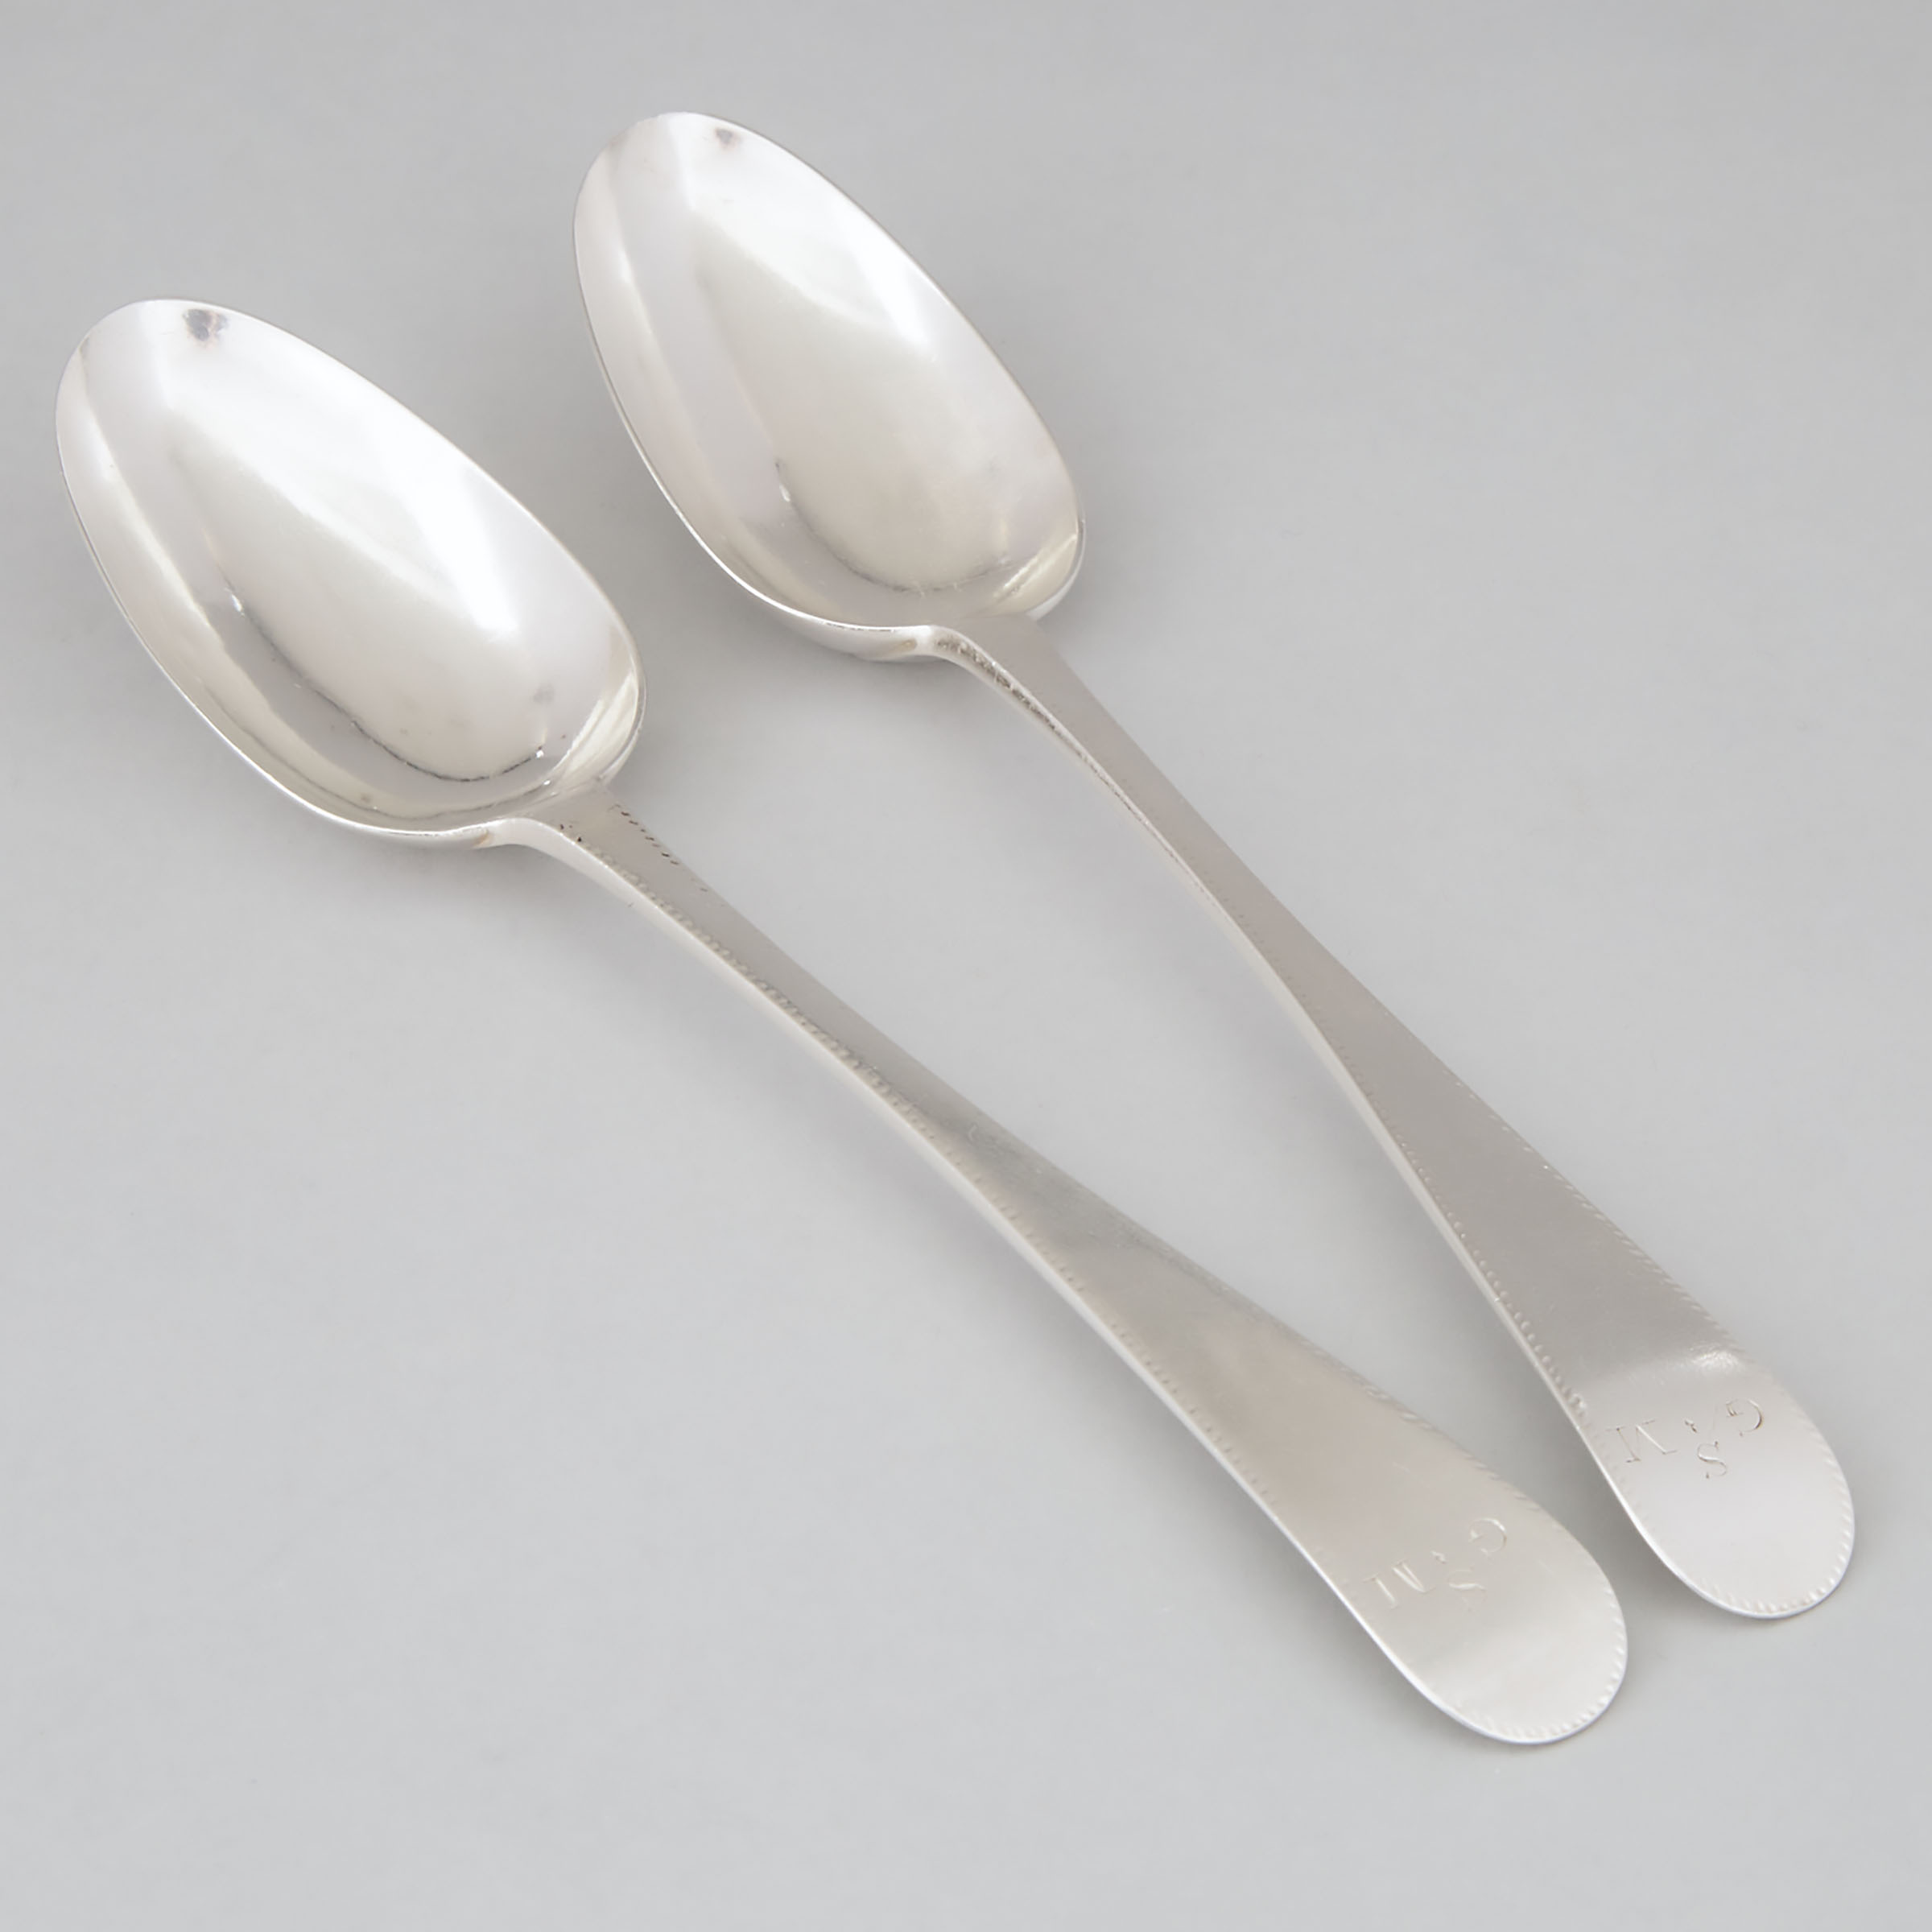 Pair of American Silver Engraved Old English Pattern Table Spoons, Thomas Underhill, New York, N.Y., c.1785-90